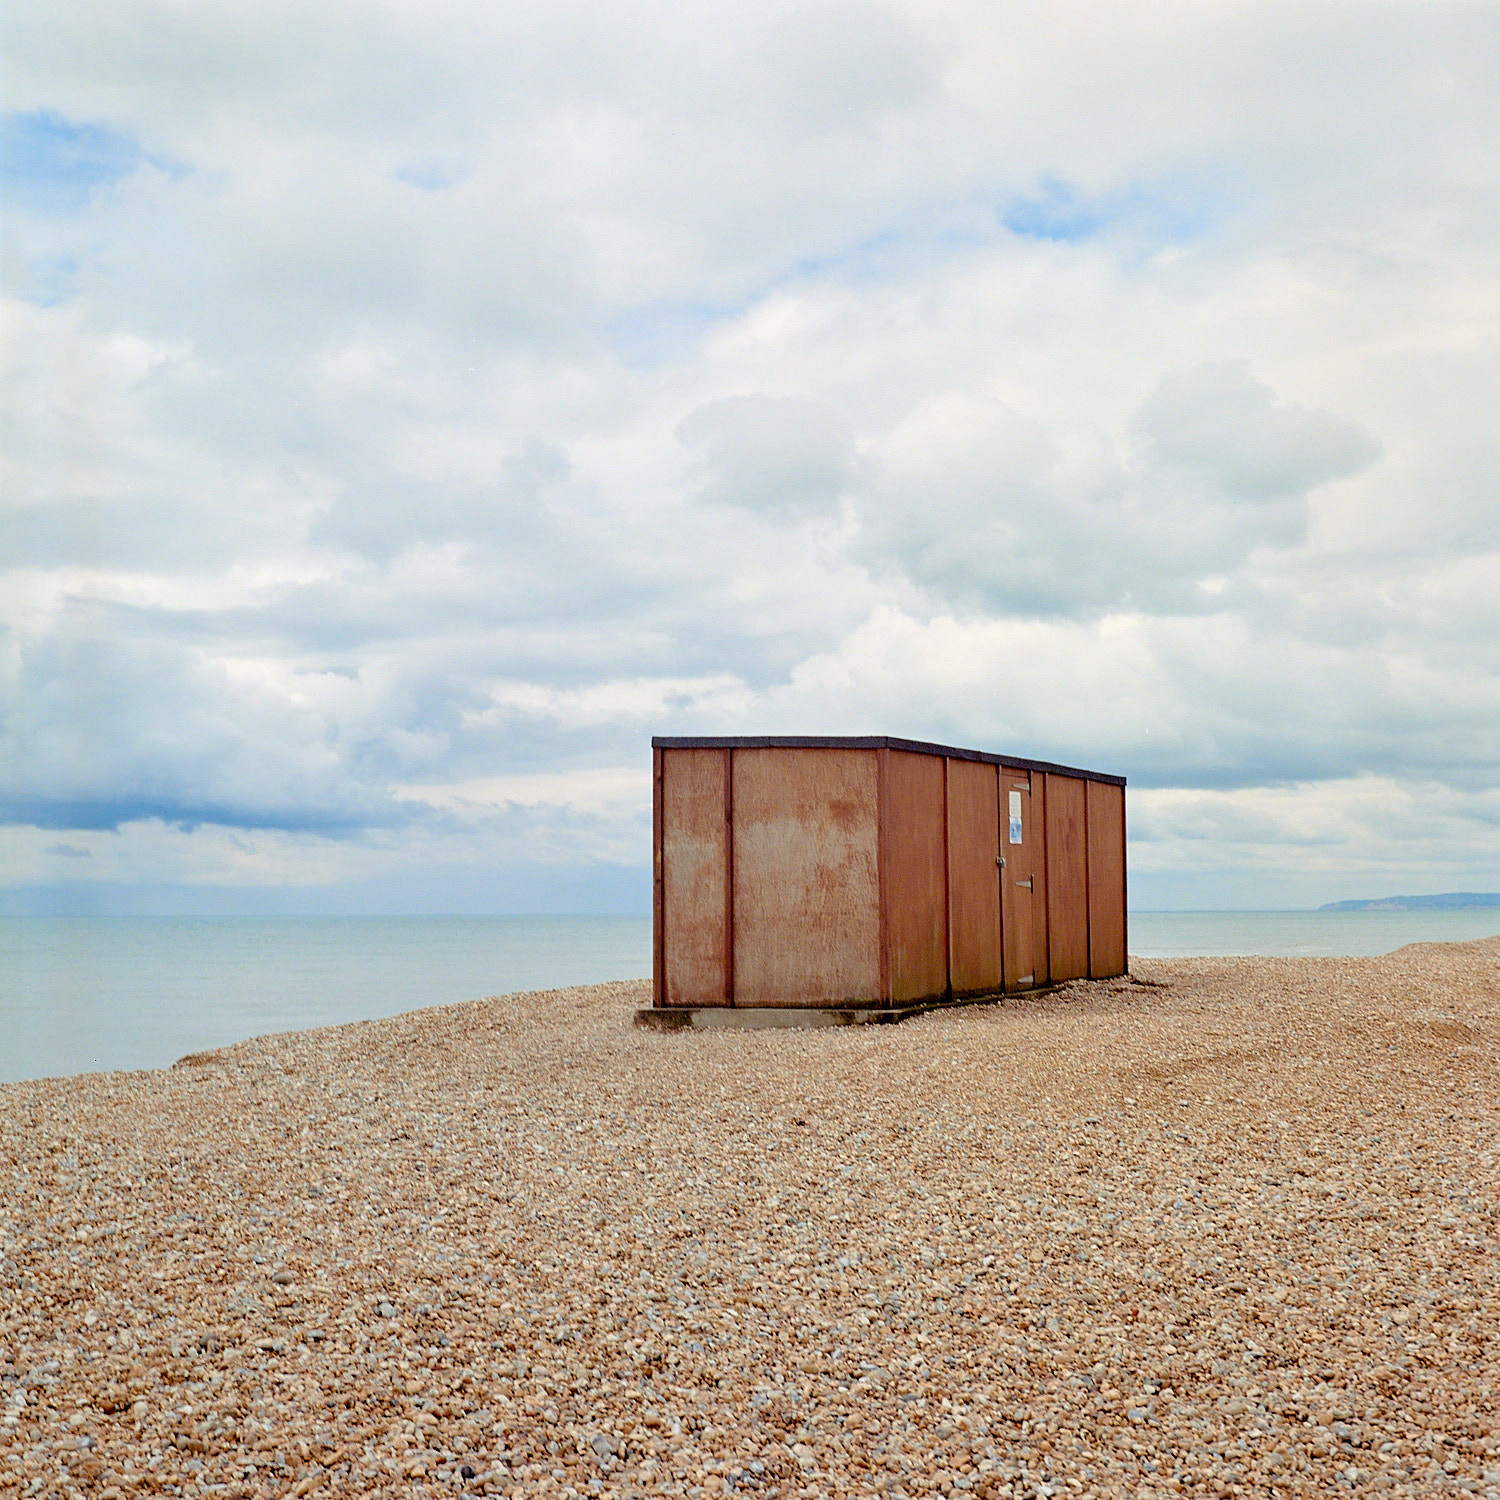 Sea Air - Winchelsea Beach to Dungeness